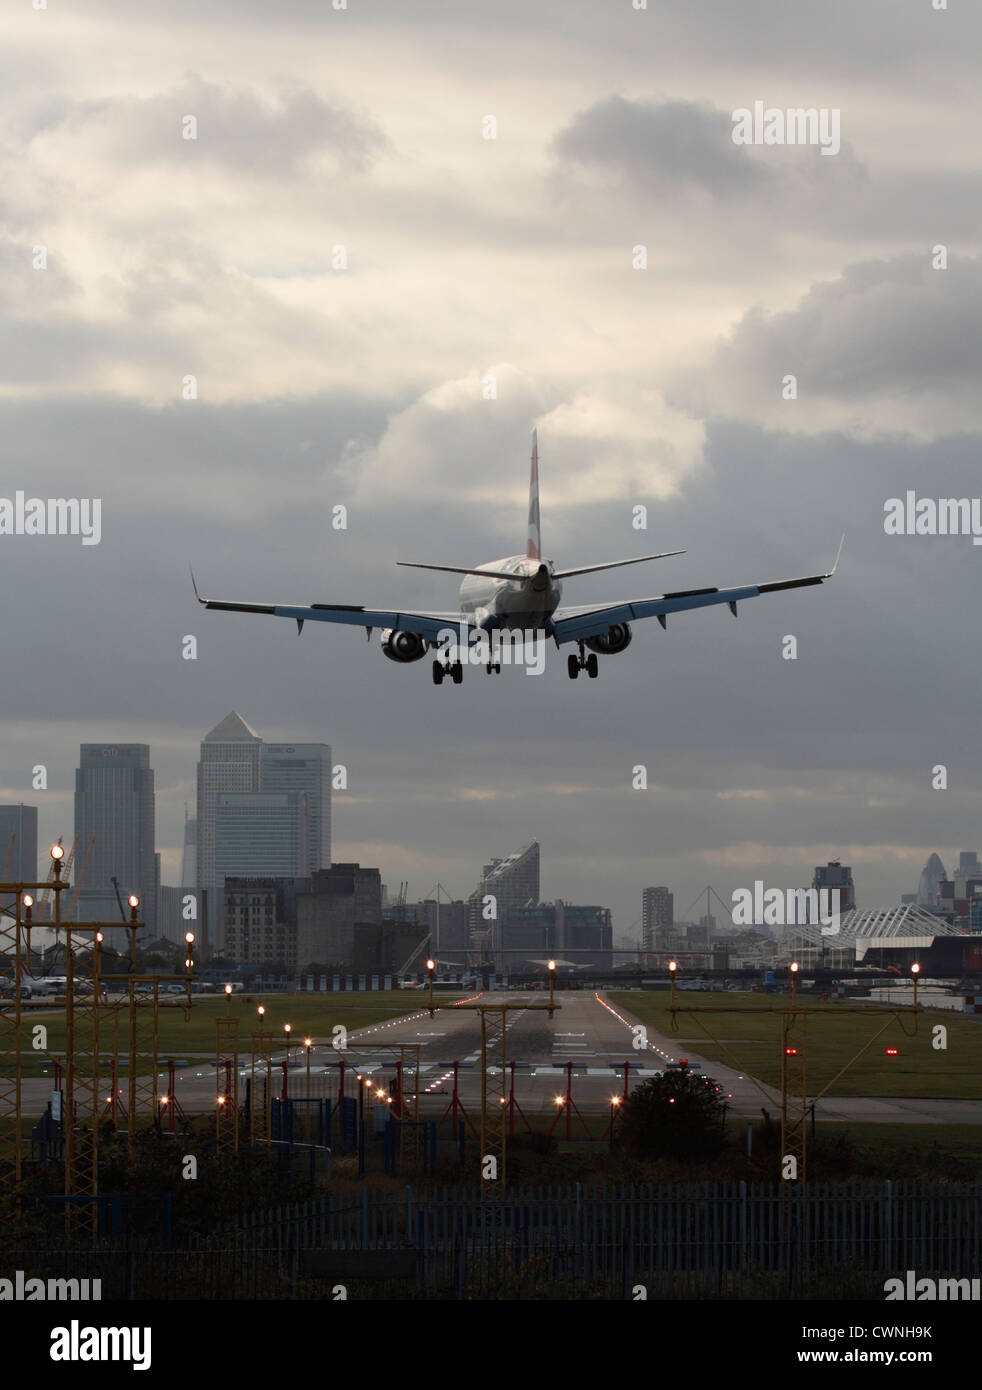 Air travel in the UK. Jet plane landing at London City Airport, with the runway in sight and the financial district visible in the background. Stock Photo